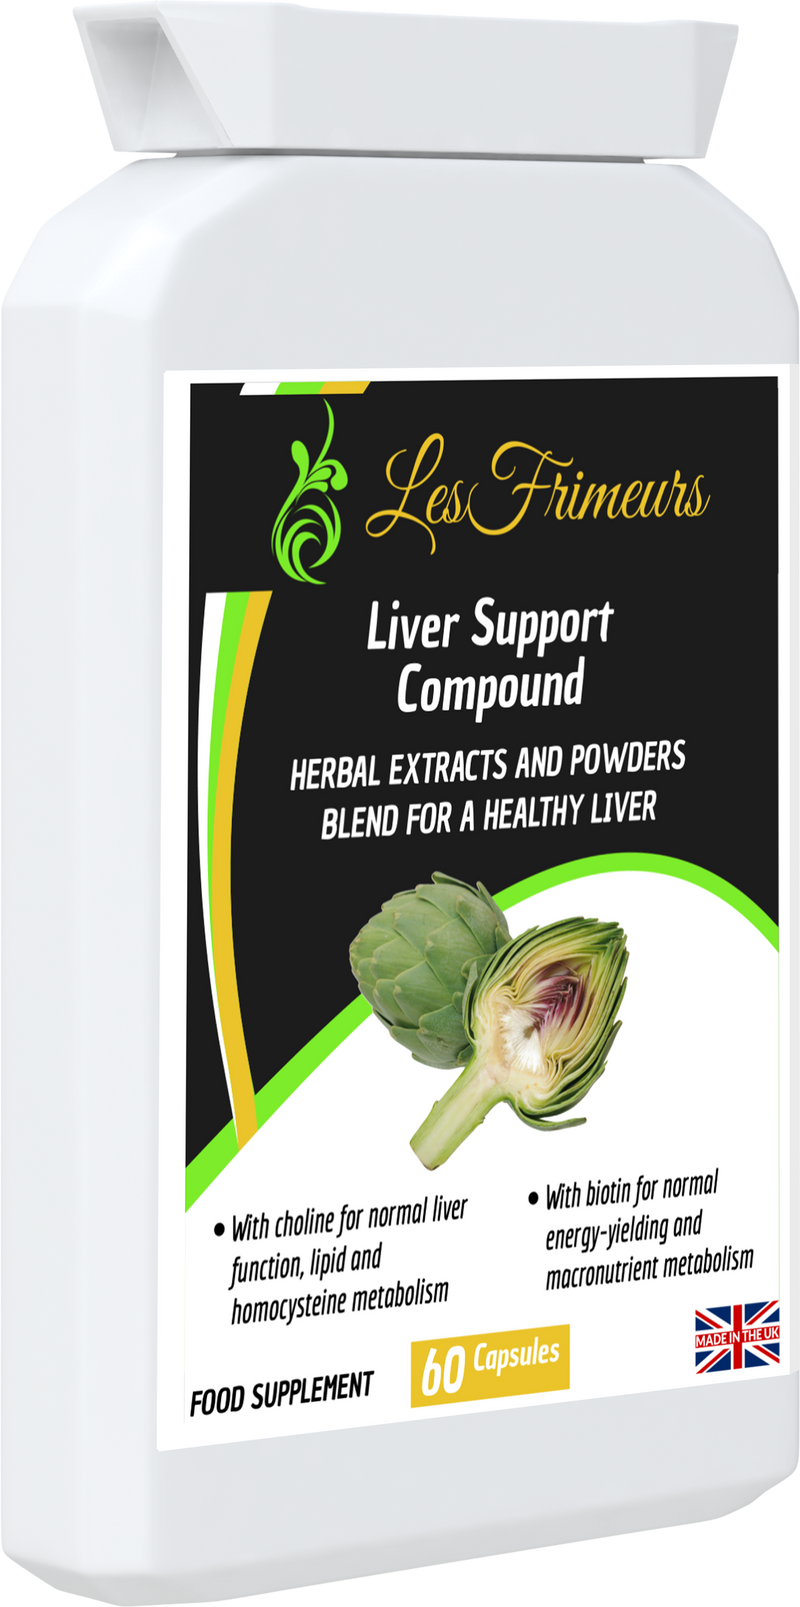 Liver Support Compound